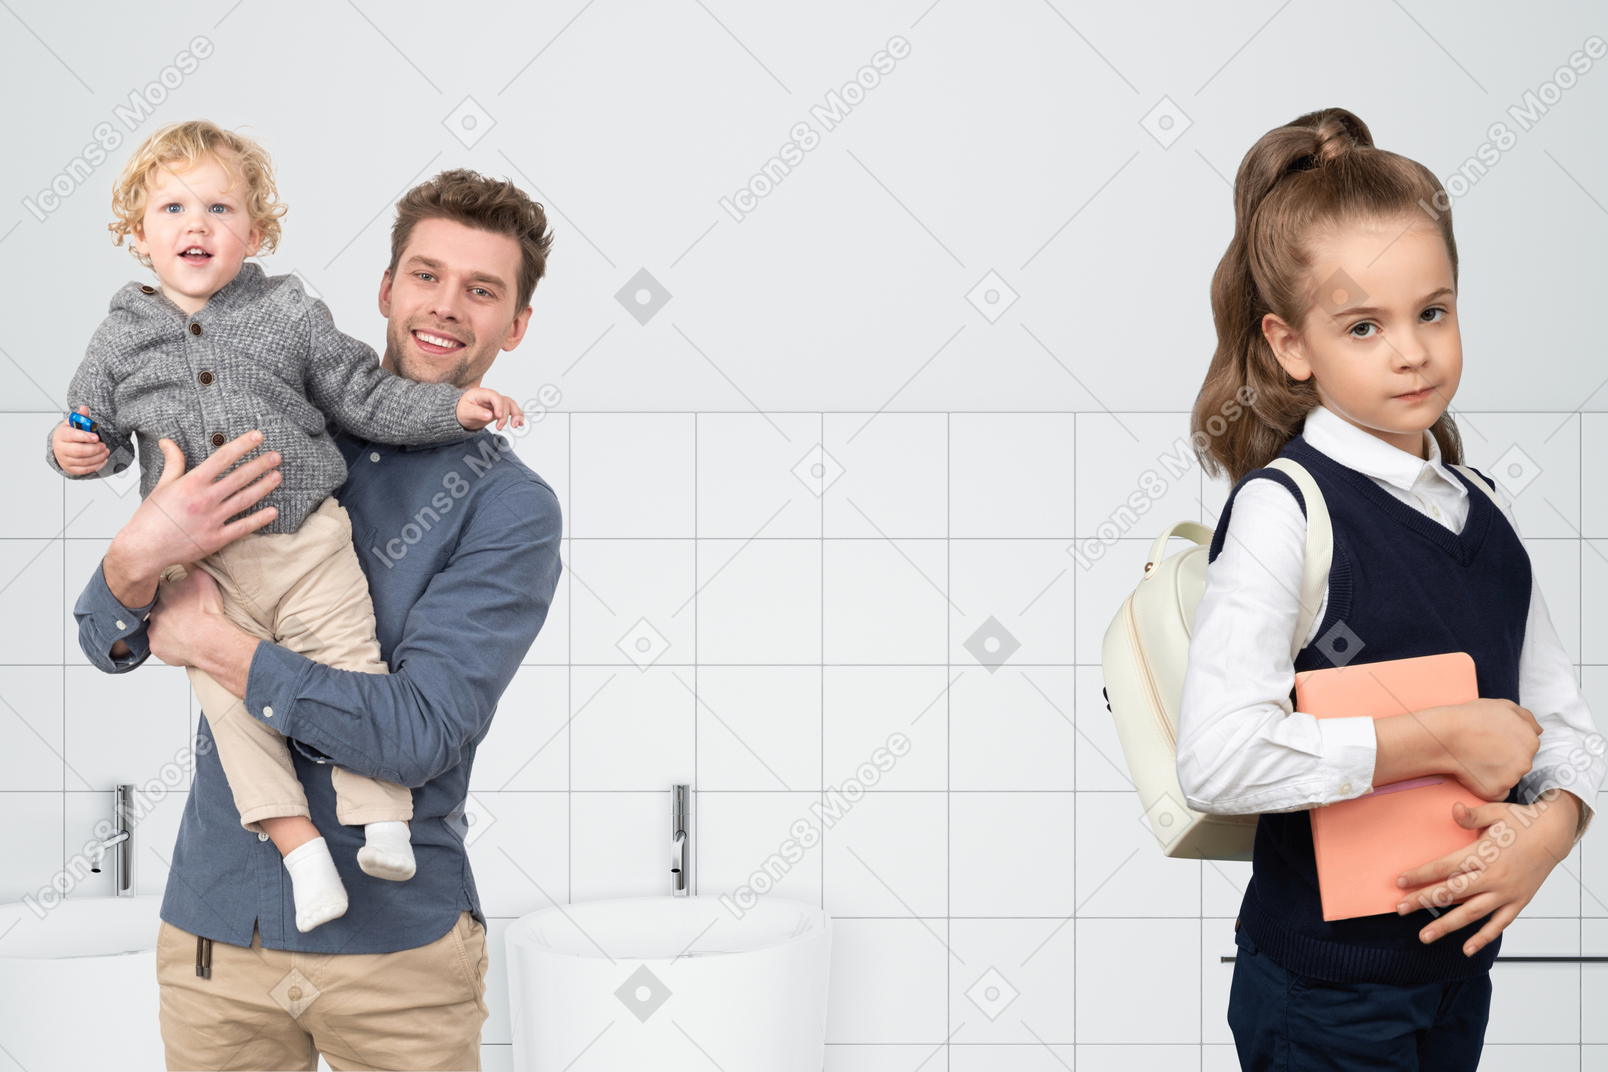 Young man holding his son and his daughter standing next to him